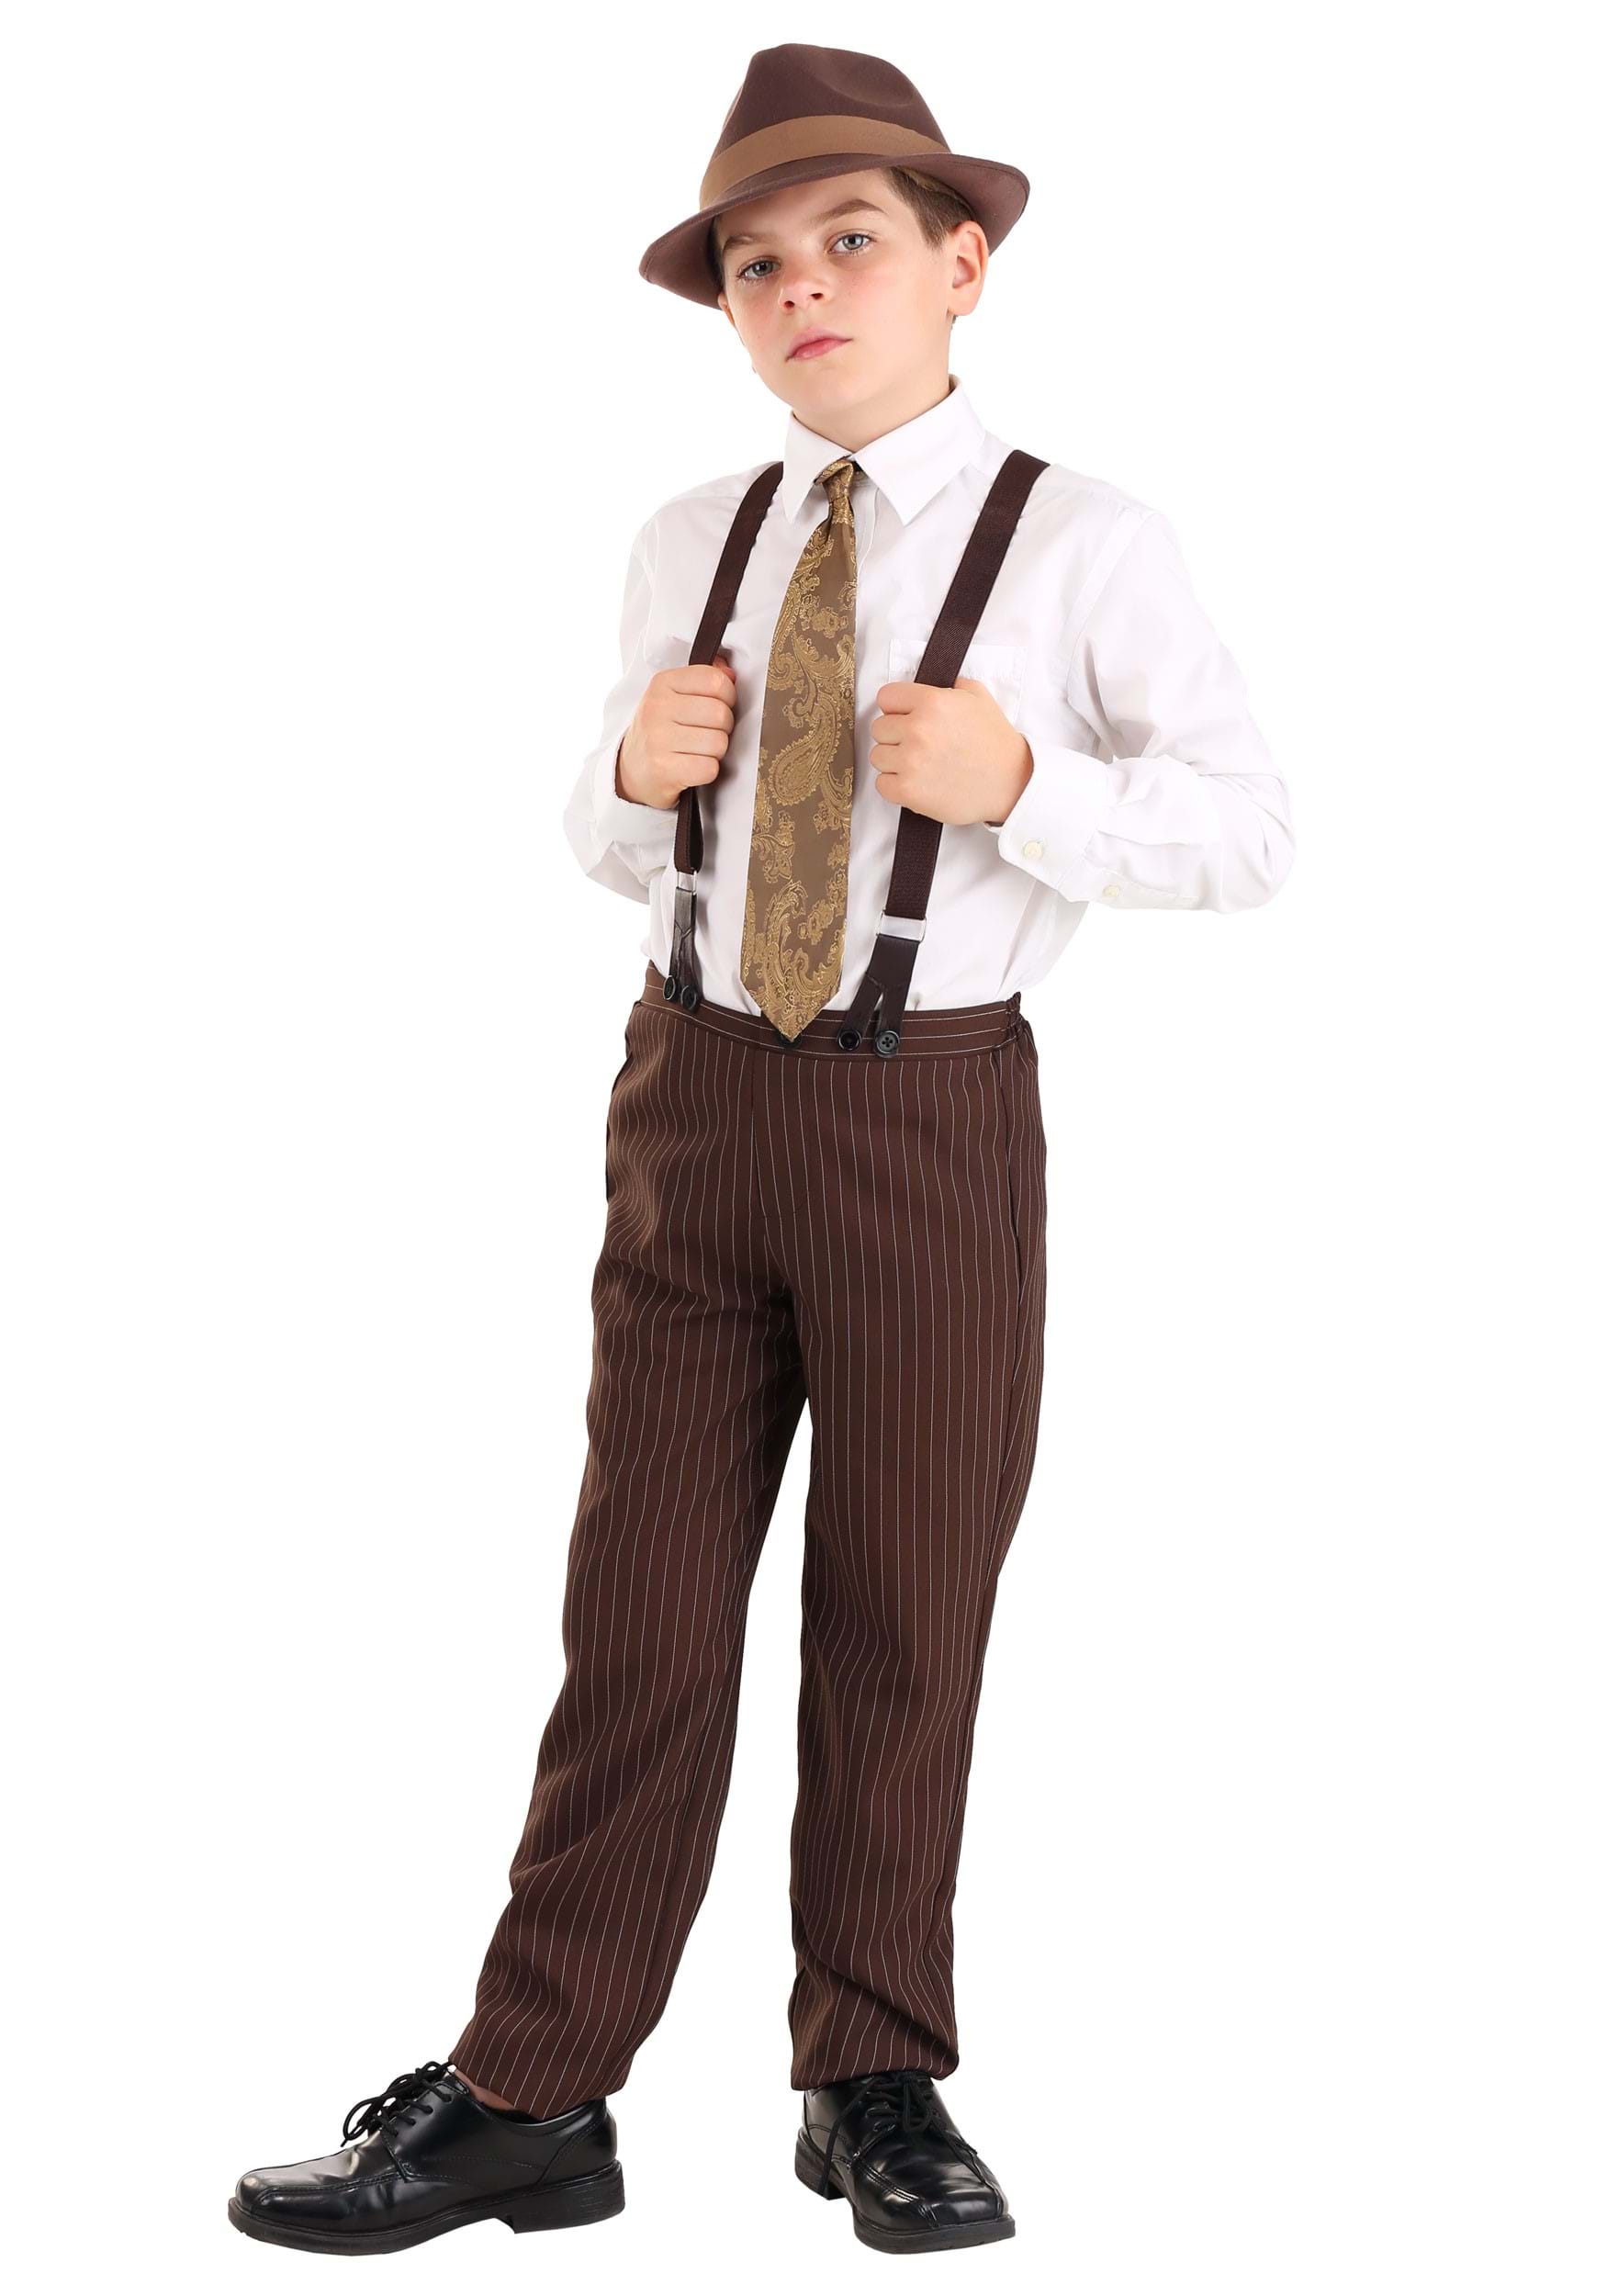 New Vintage Boys Clothing and Costumes Clyde Kids Costume $24.99 AT vintagedancer.com